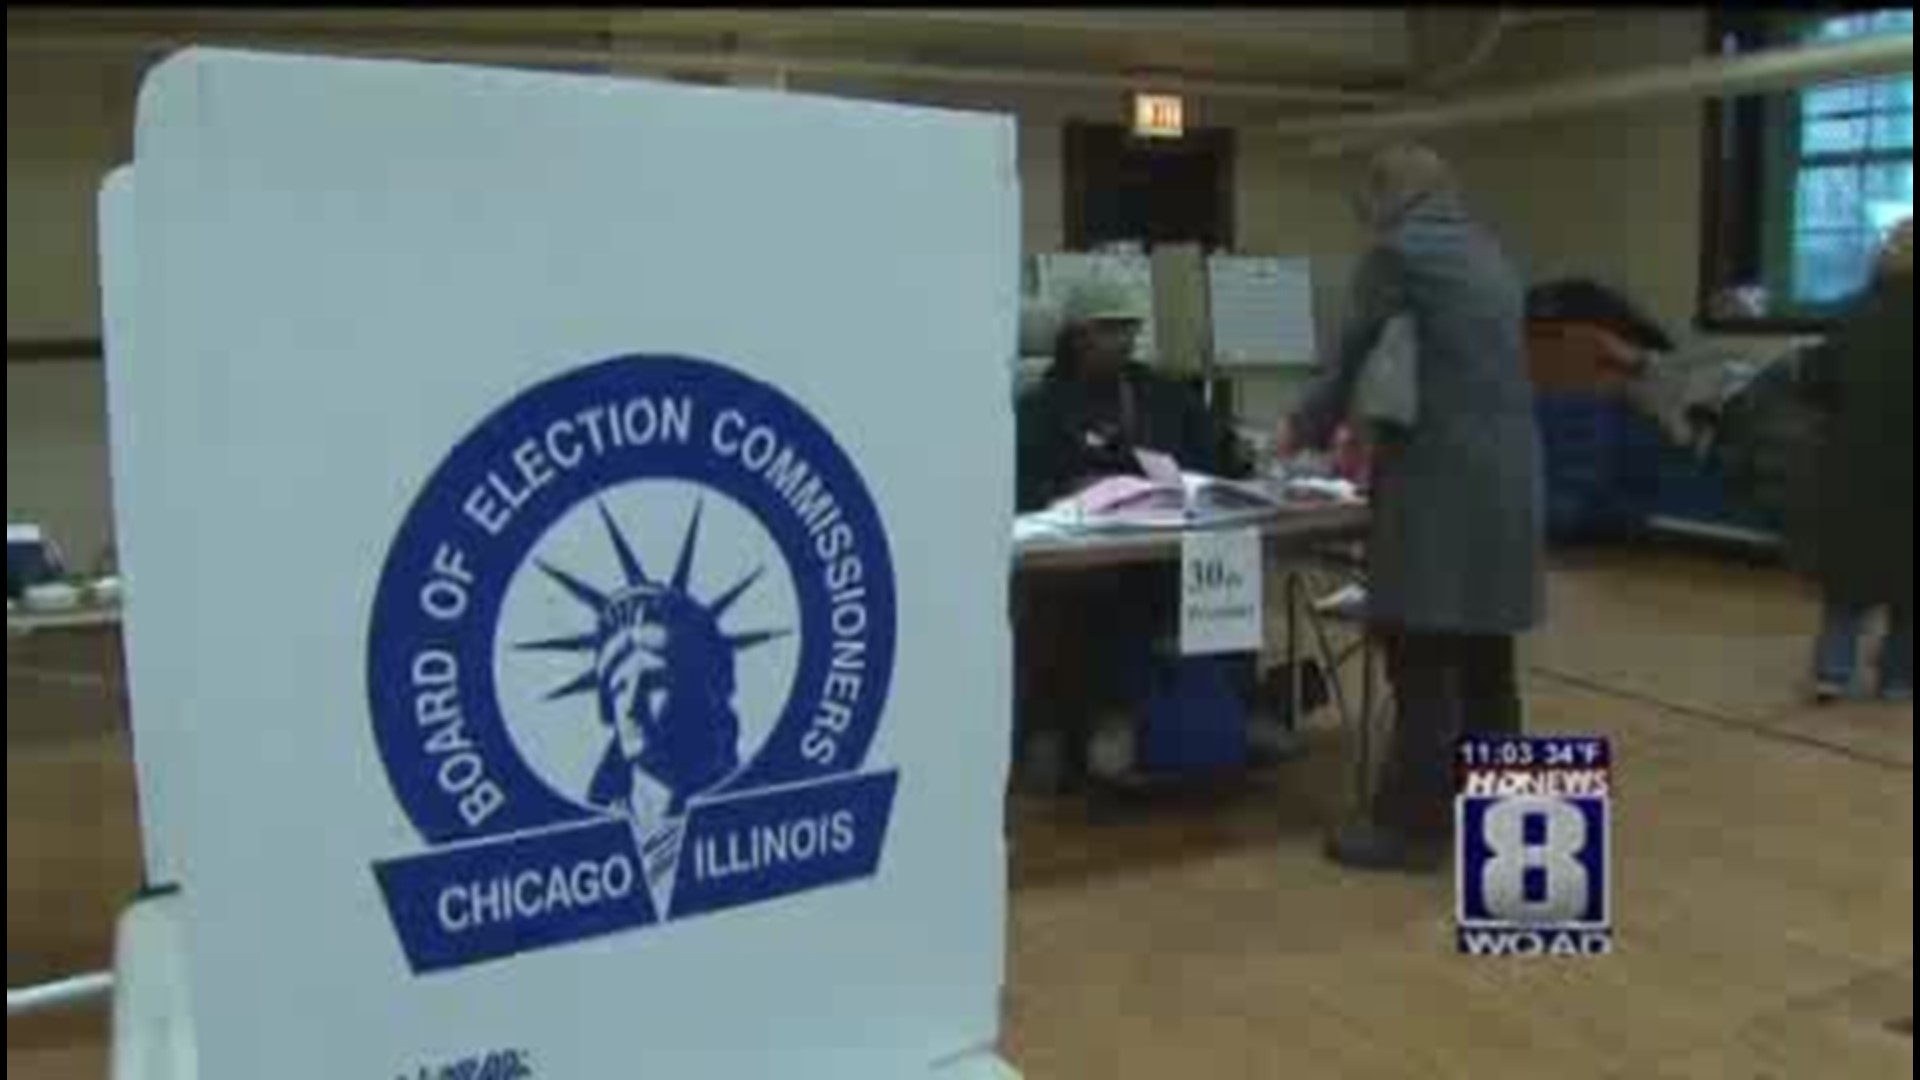 Early voting starts in Illinois